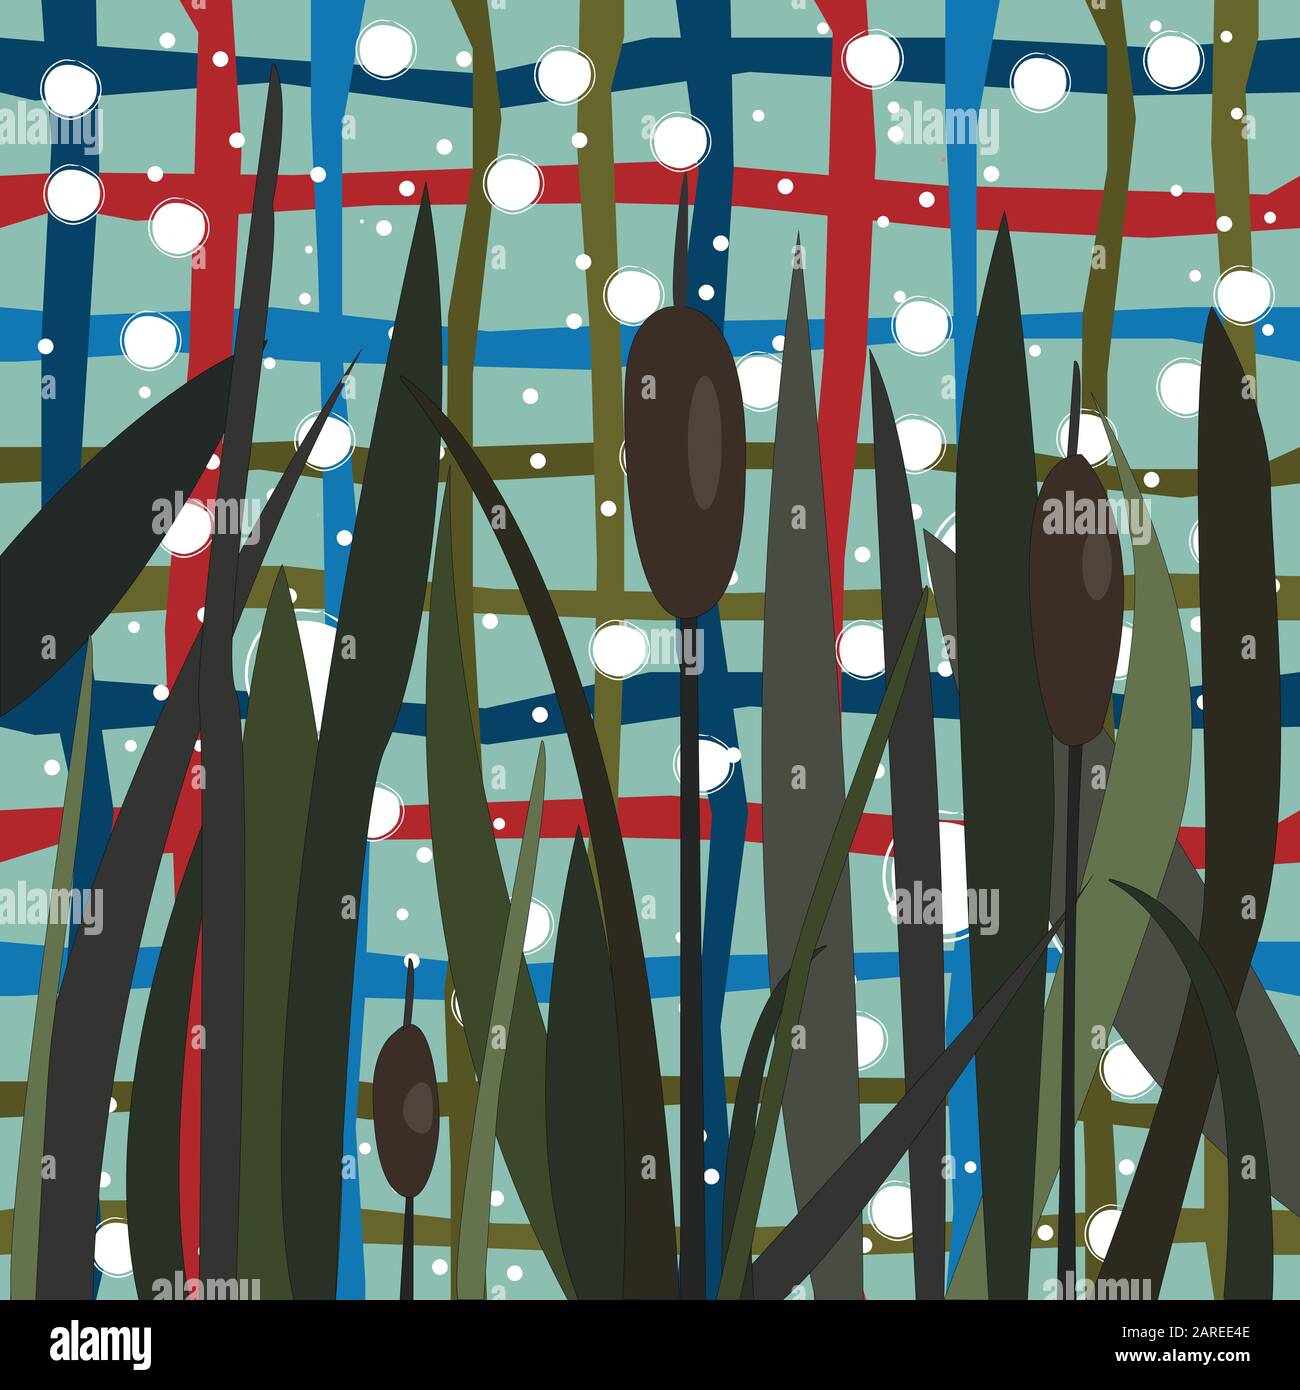 Bush of Swamp Reed on a Lake. vector Illustration Stock Vector